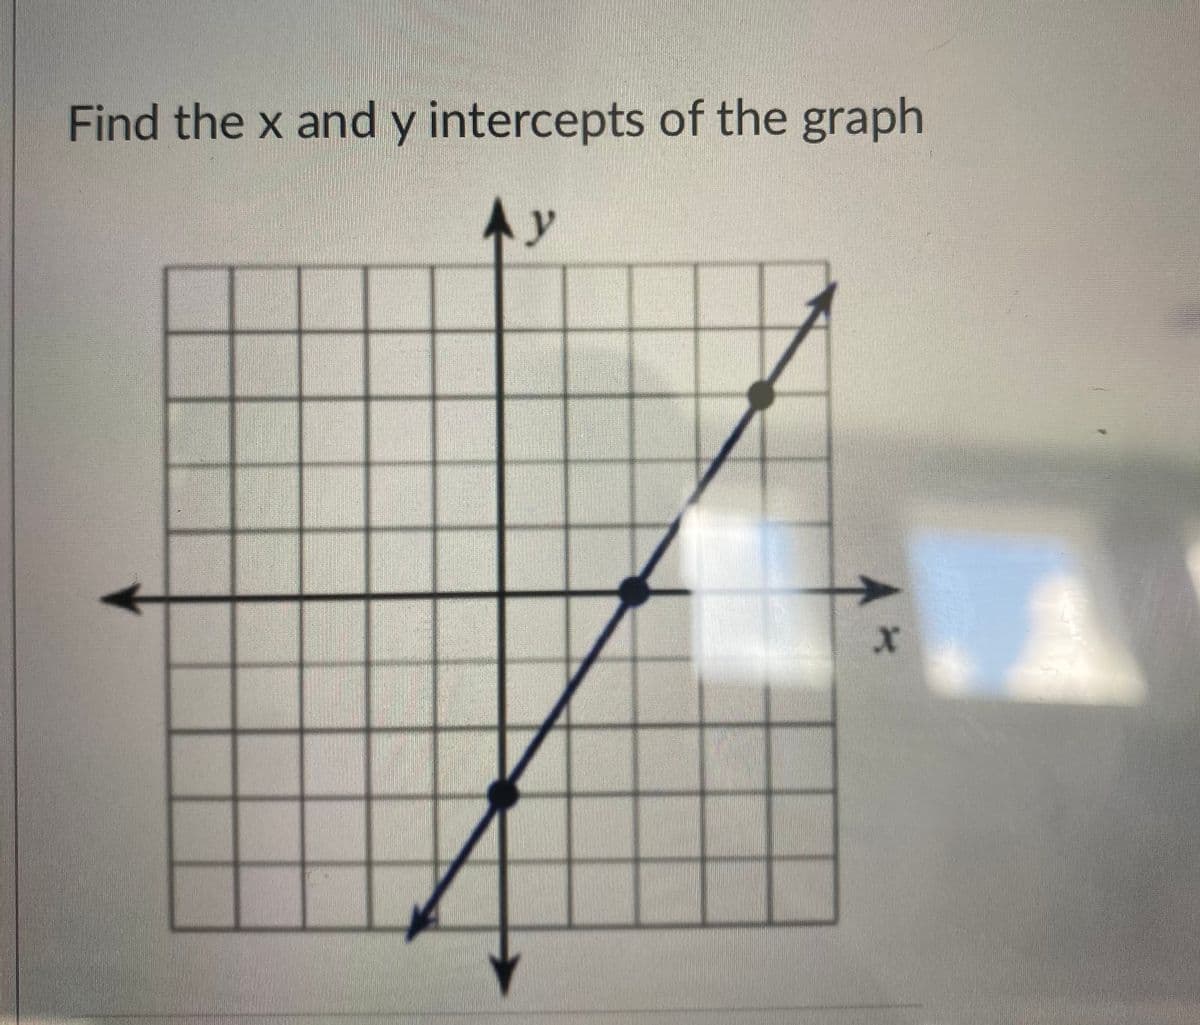 Find the x and y intercepts of the graph
